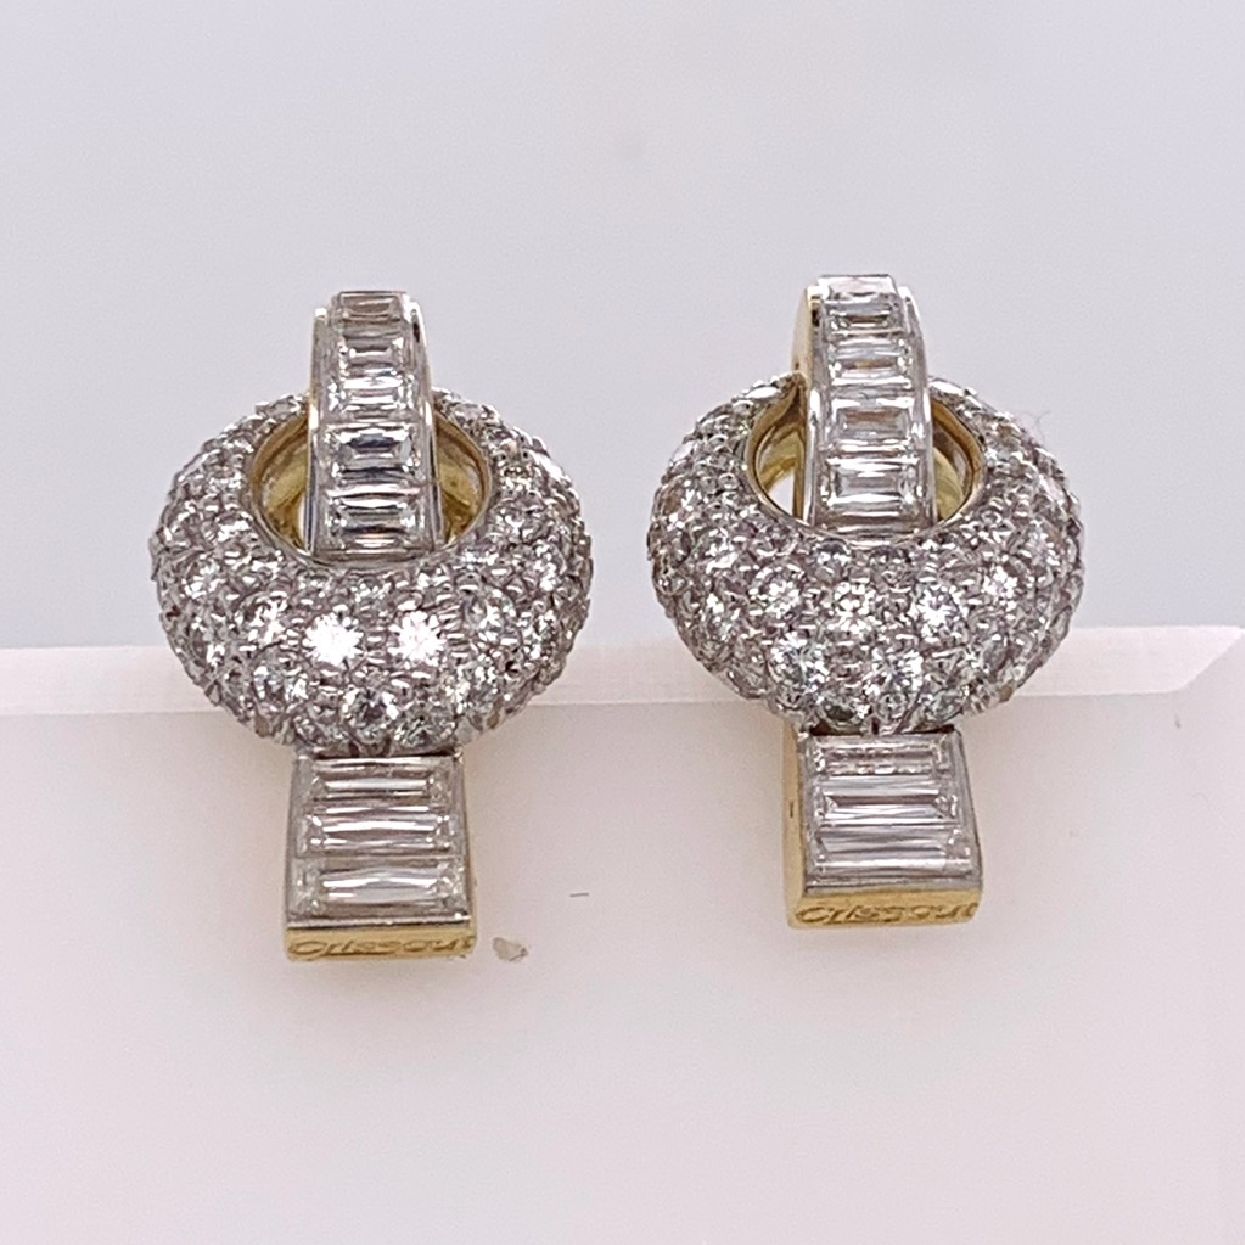 18K Two Tone Christoper Designs Pave Round and Baguette Diamond Earrings 4CTTW